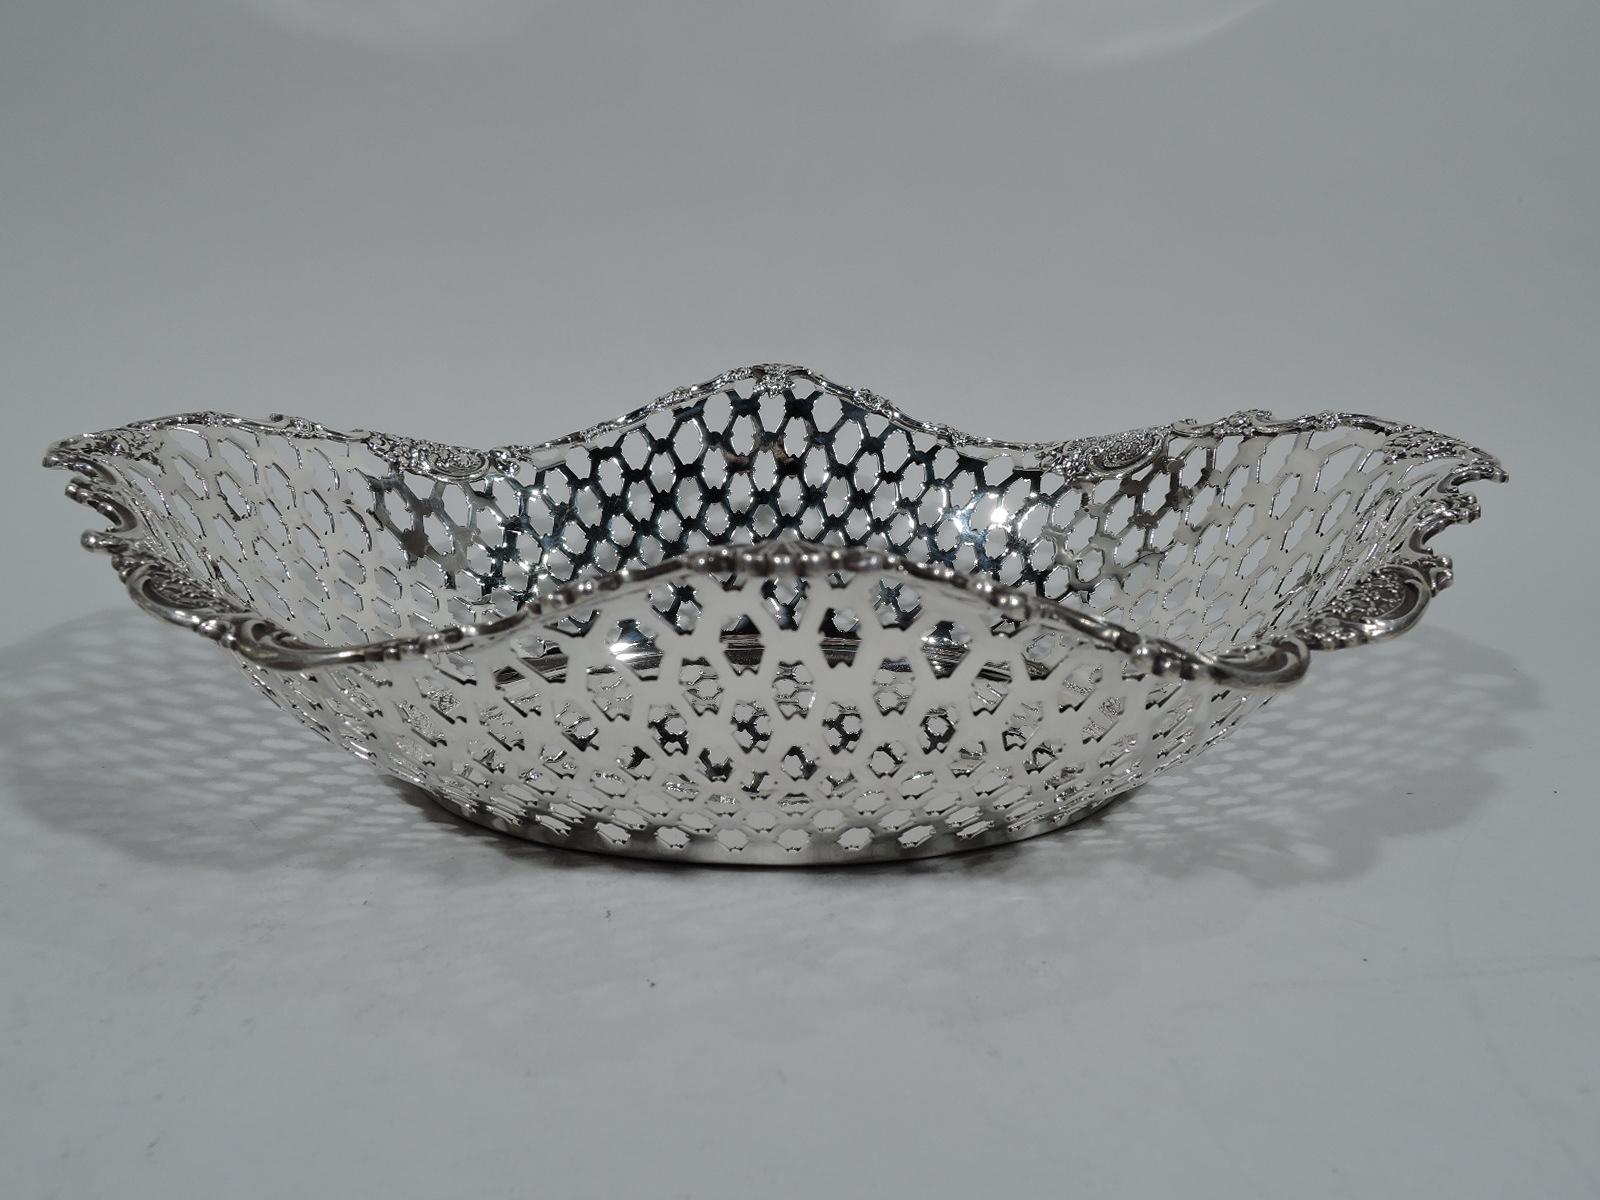 Edwardian sterling silver basket. Made by Tiffany & Co. in New York. Solid oval well. Curved sides with pierced diaper sides and wavy rim with applied scrolls, shells, and flowers. Hallmark includes pattern no. 15517 (first produced in 1902) and